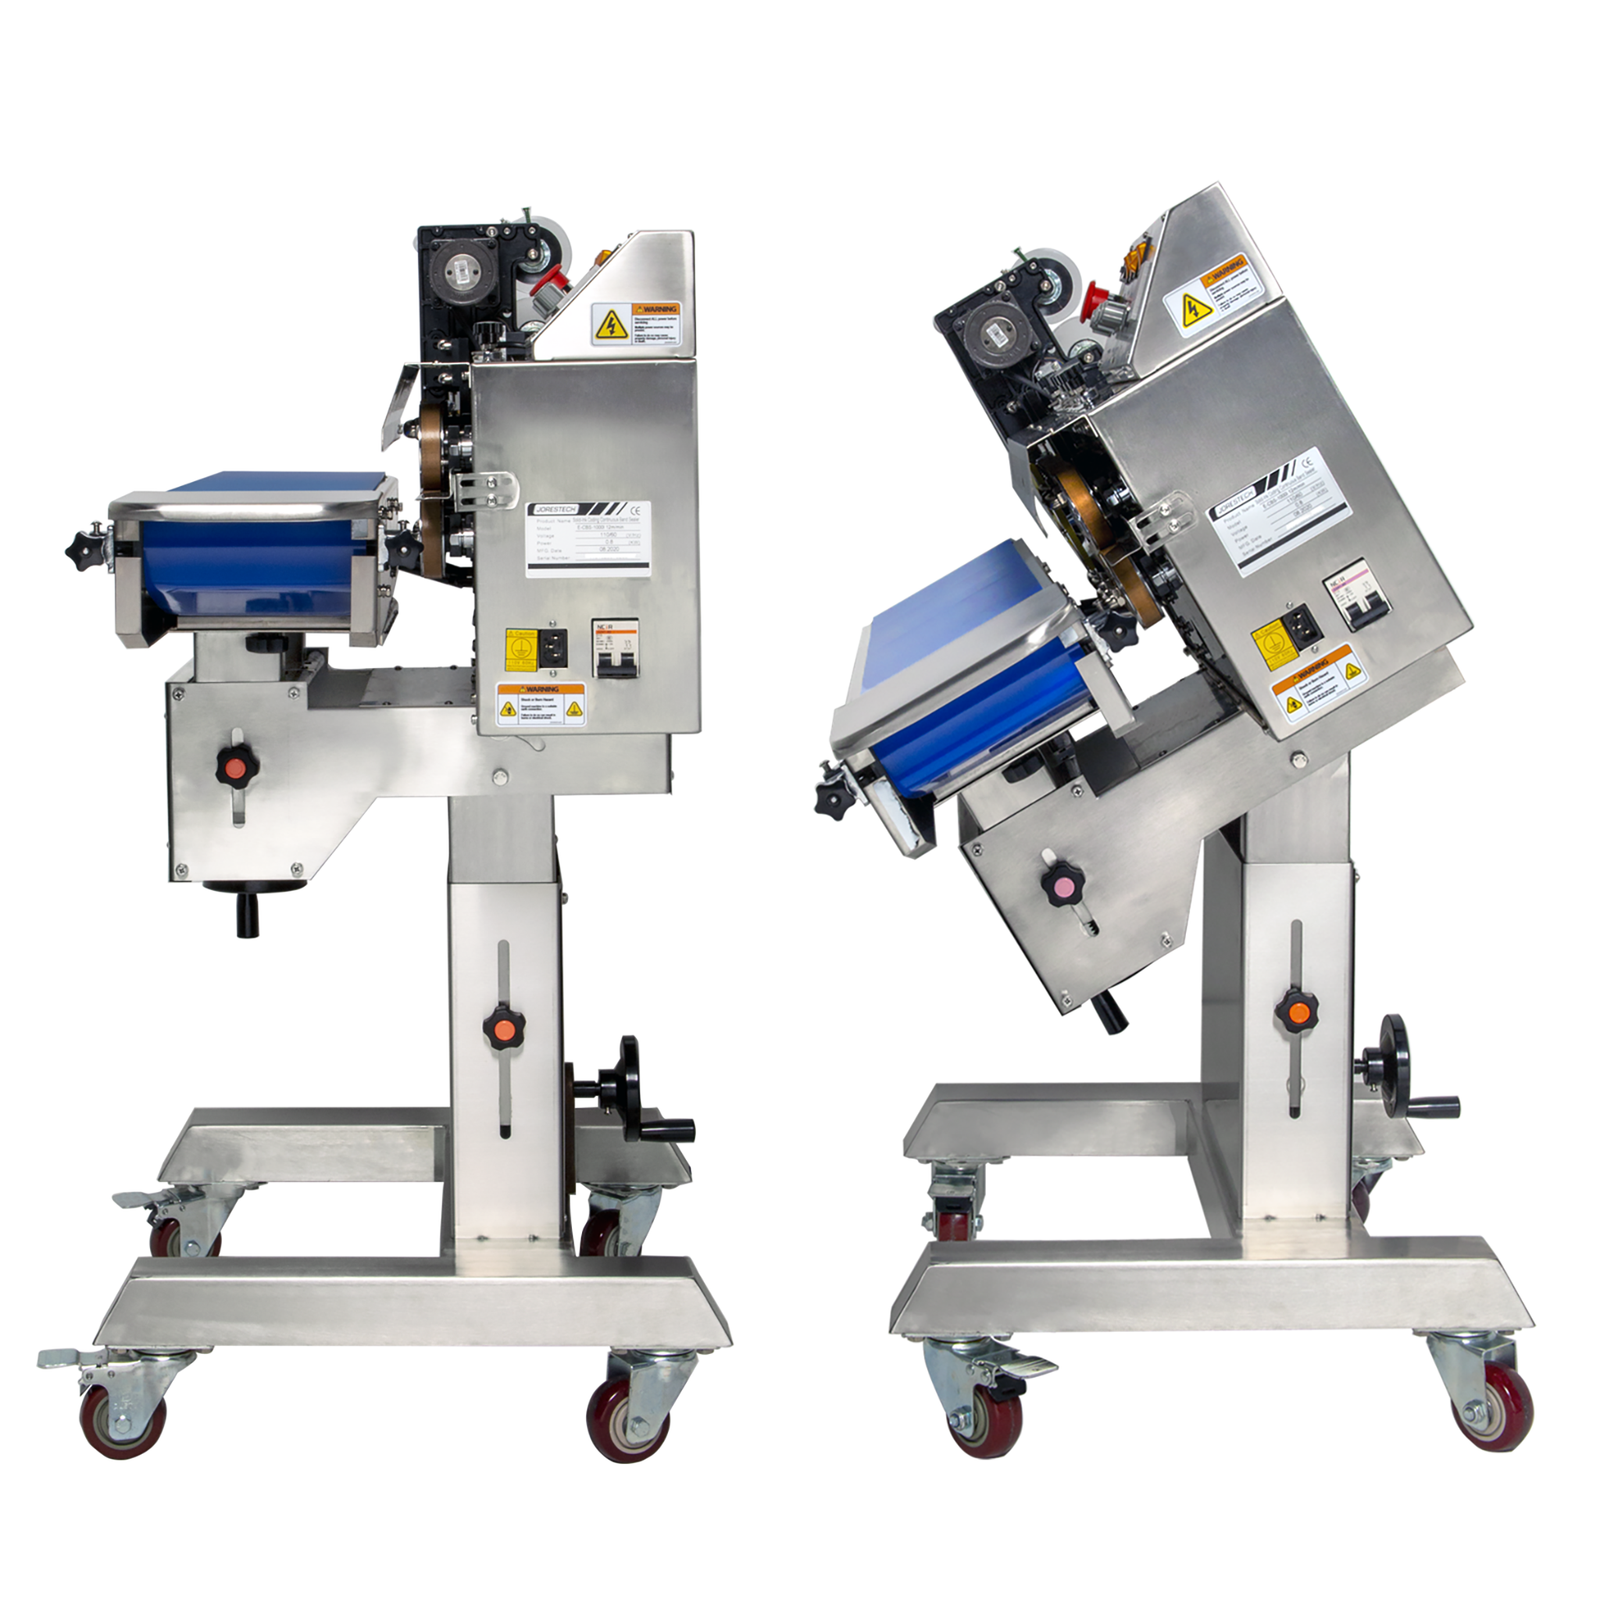 2 stainless continuous band sealers with coder next to each other. One is in an horizontal position, the other one has been tilted forward to an angle to show that the machine can be used in both positions.